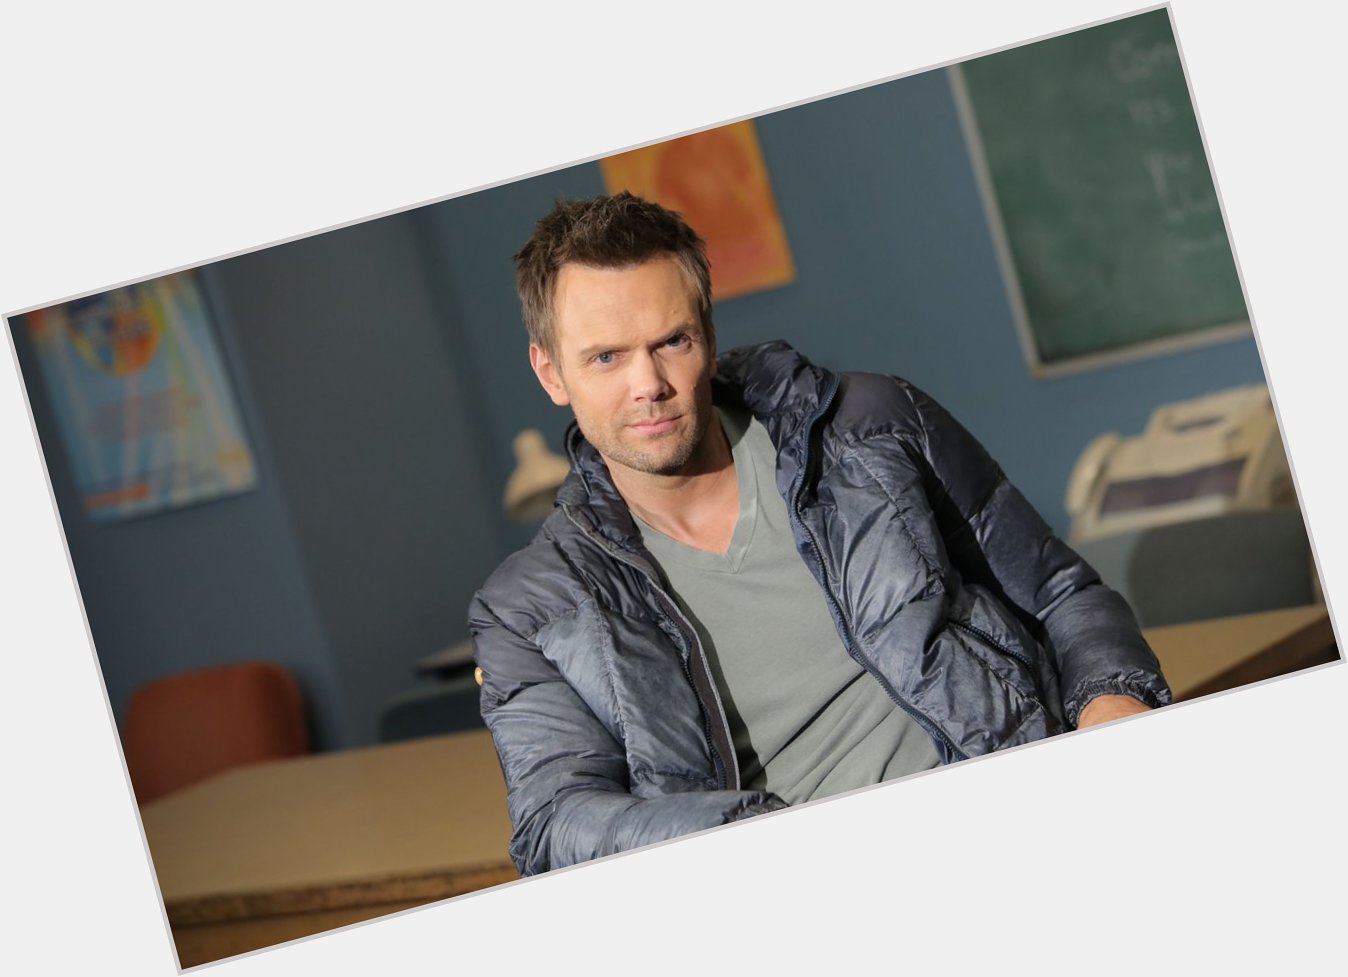 Happy Birthday to Joel McHale, who turns 44 today! 